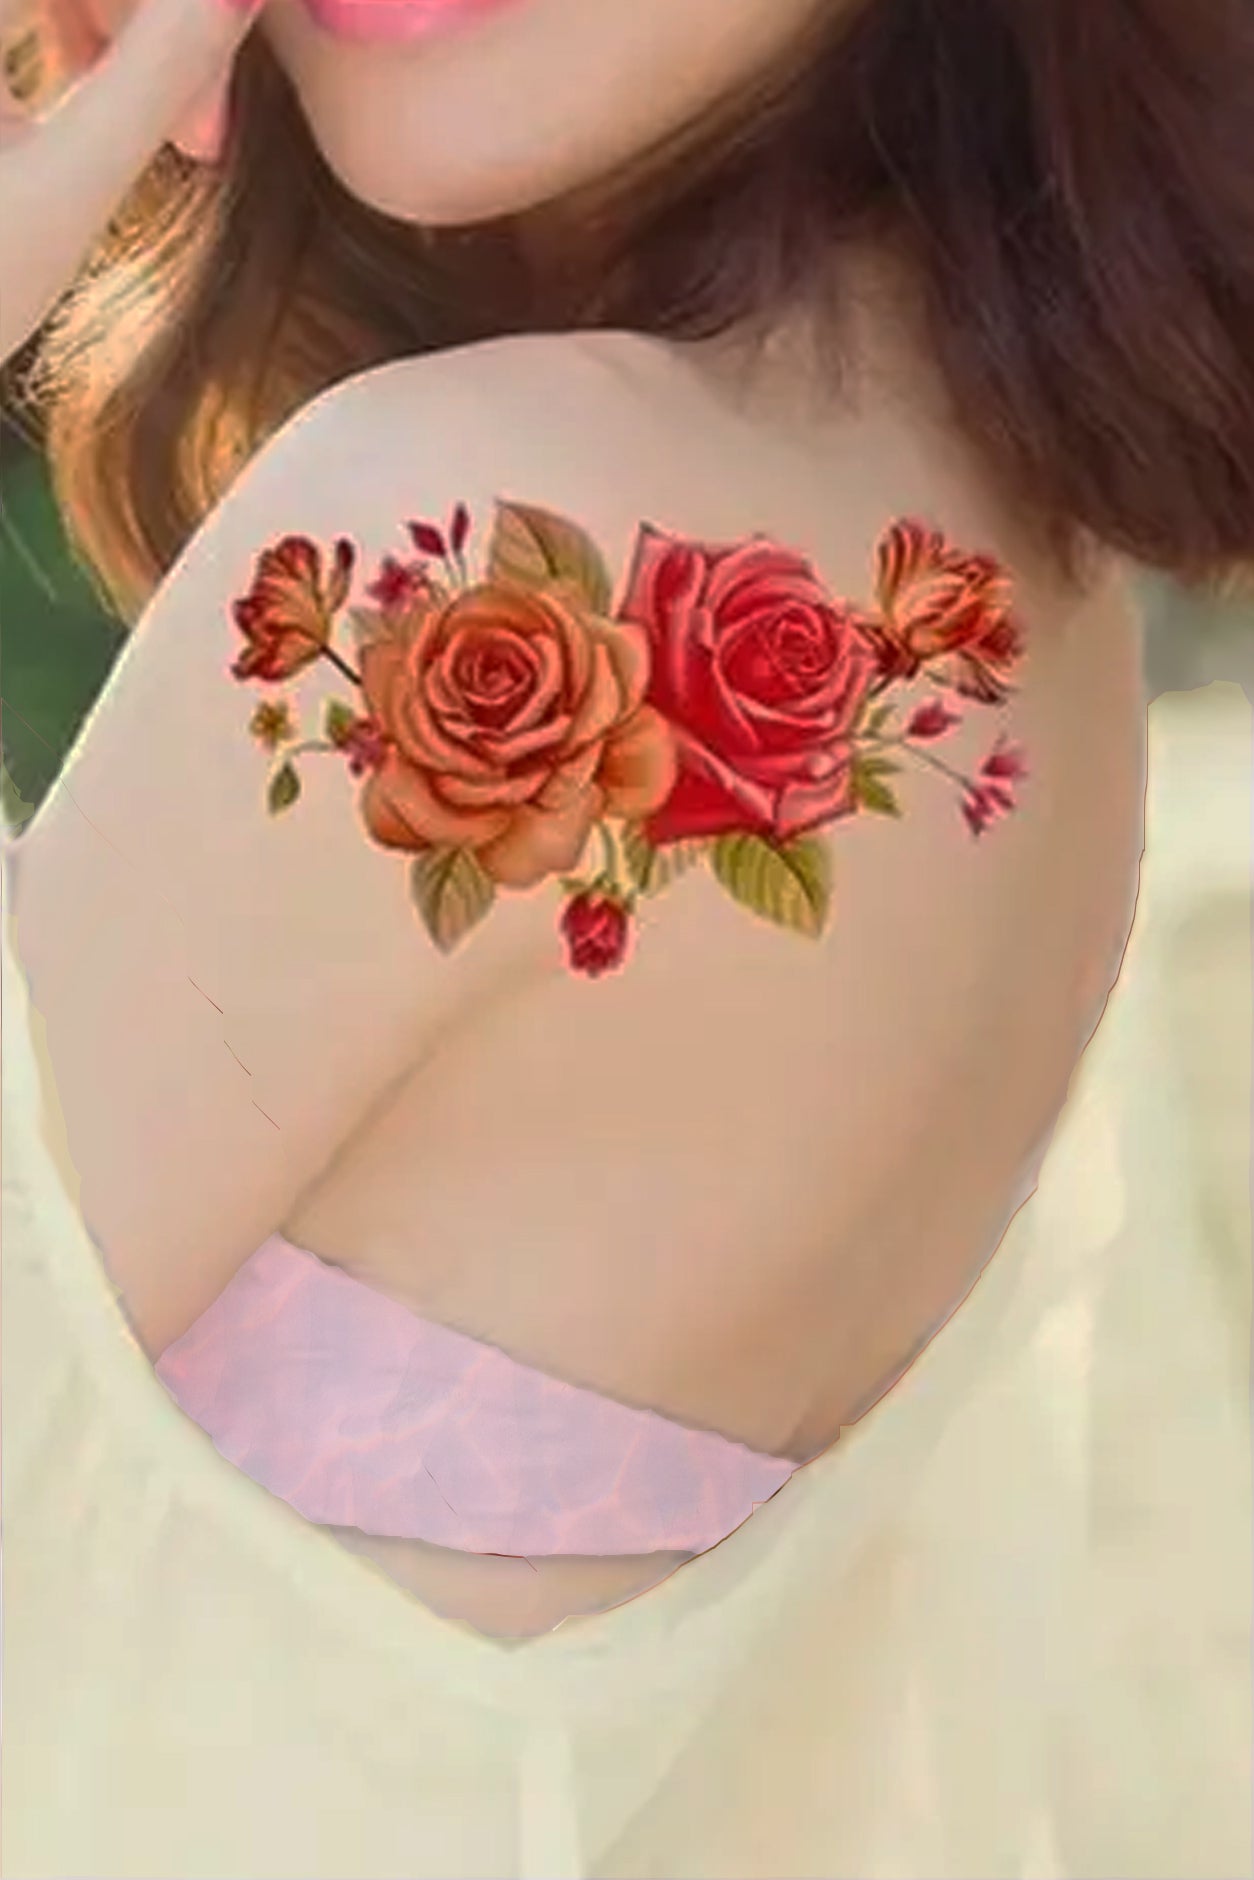 Image of girls shoulder wearing tattoo. A delicate bouquet of lifelike roses will beautify your arm, leg, hip, or chest. The delicate rose capture light and shadow just right, the spray has small buds and leaves in the background at the right juxtaposition.